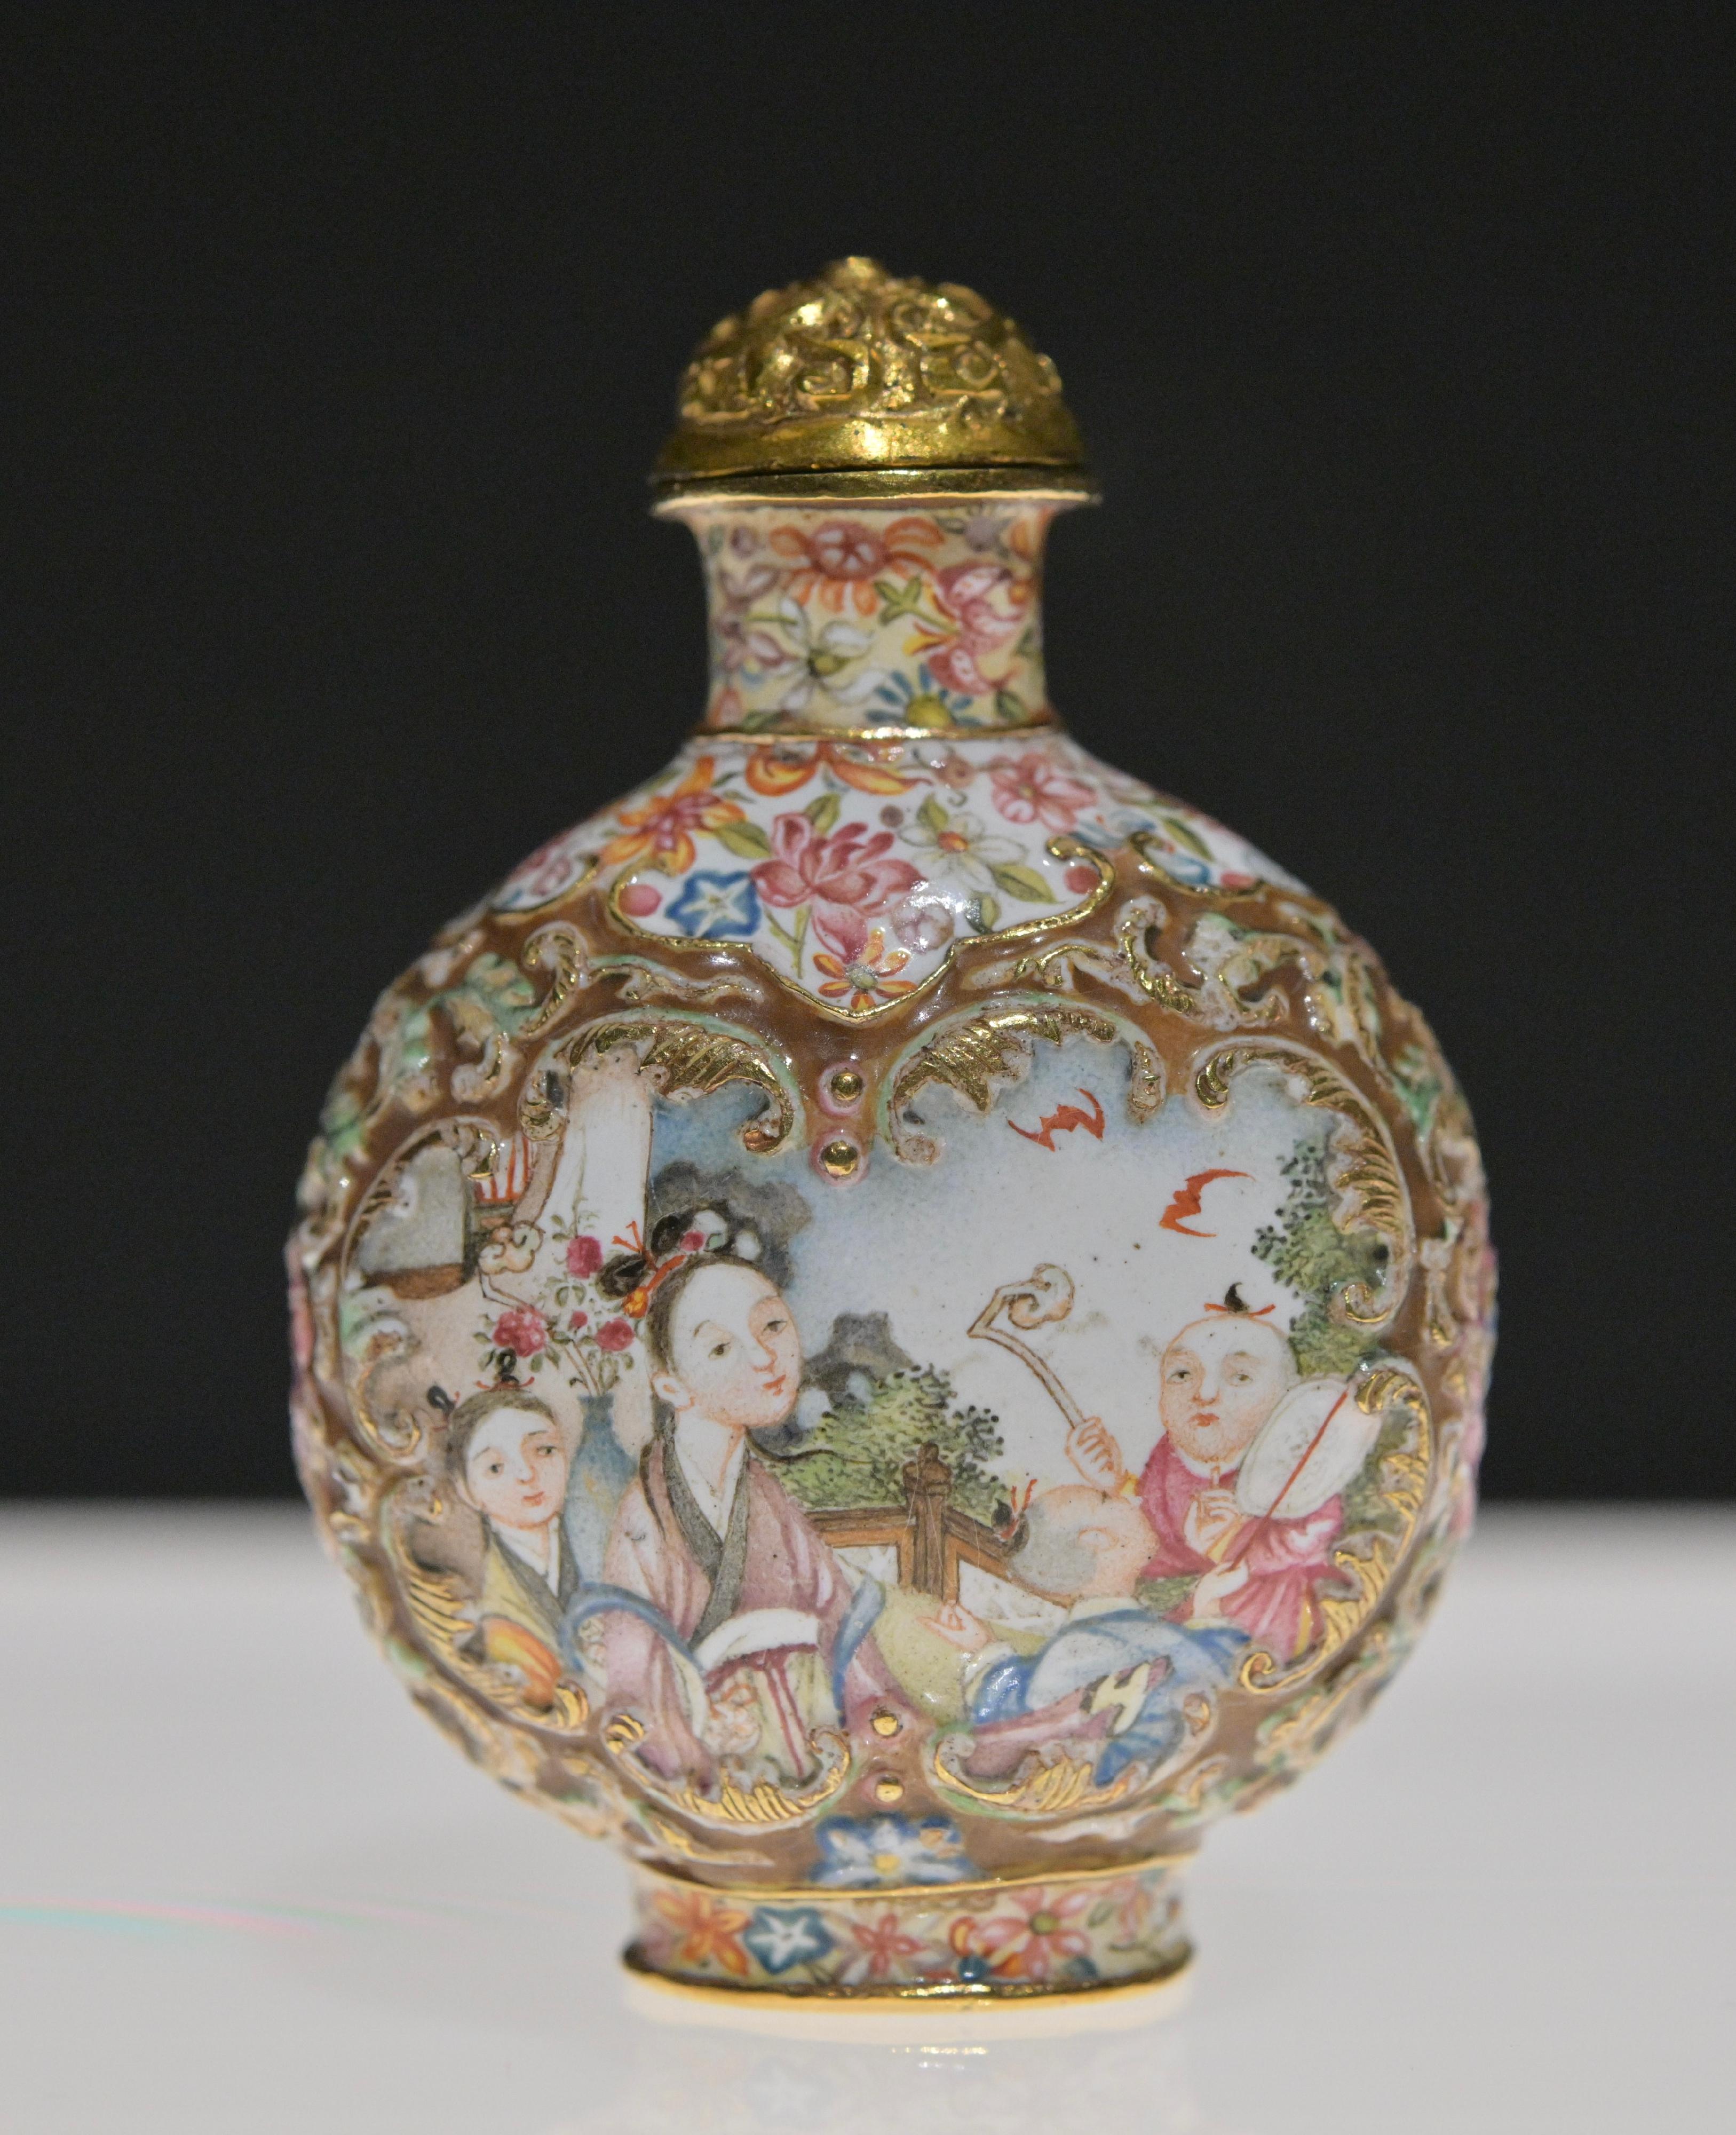 The opening ceremony of the "Art of Gifting: The Fuyun Xuan Collection of Chinese Snuff Bottles" exhibition and donation ceremony was held today (April 11) at the Hong Kong Museum of Art. Photo shows a gold snuff bottle with scene of mother and children in painted enamels.